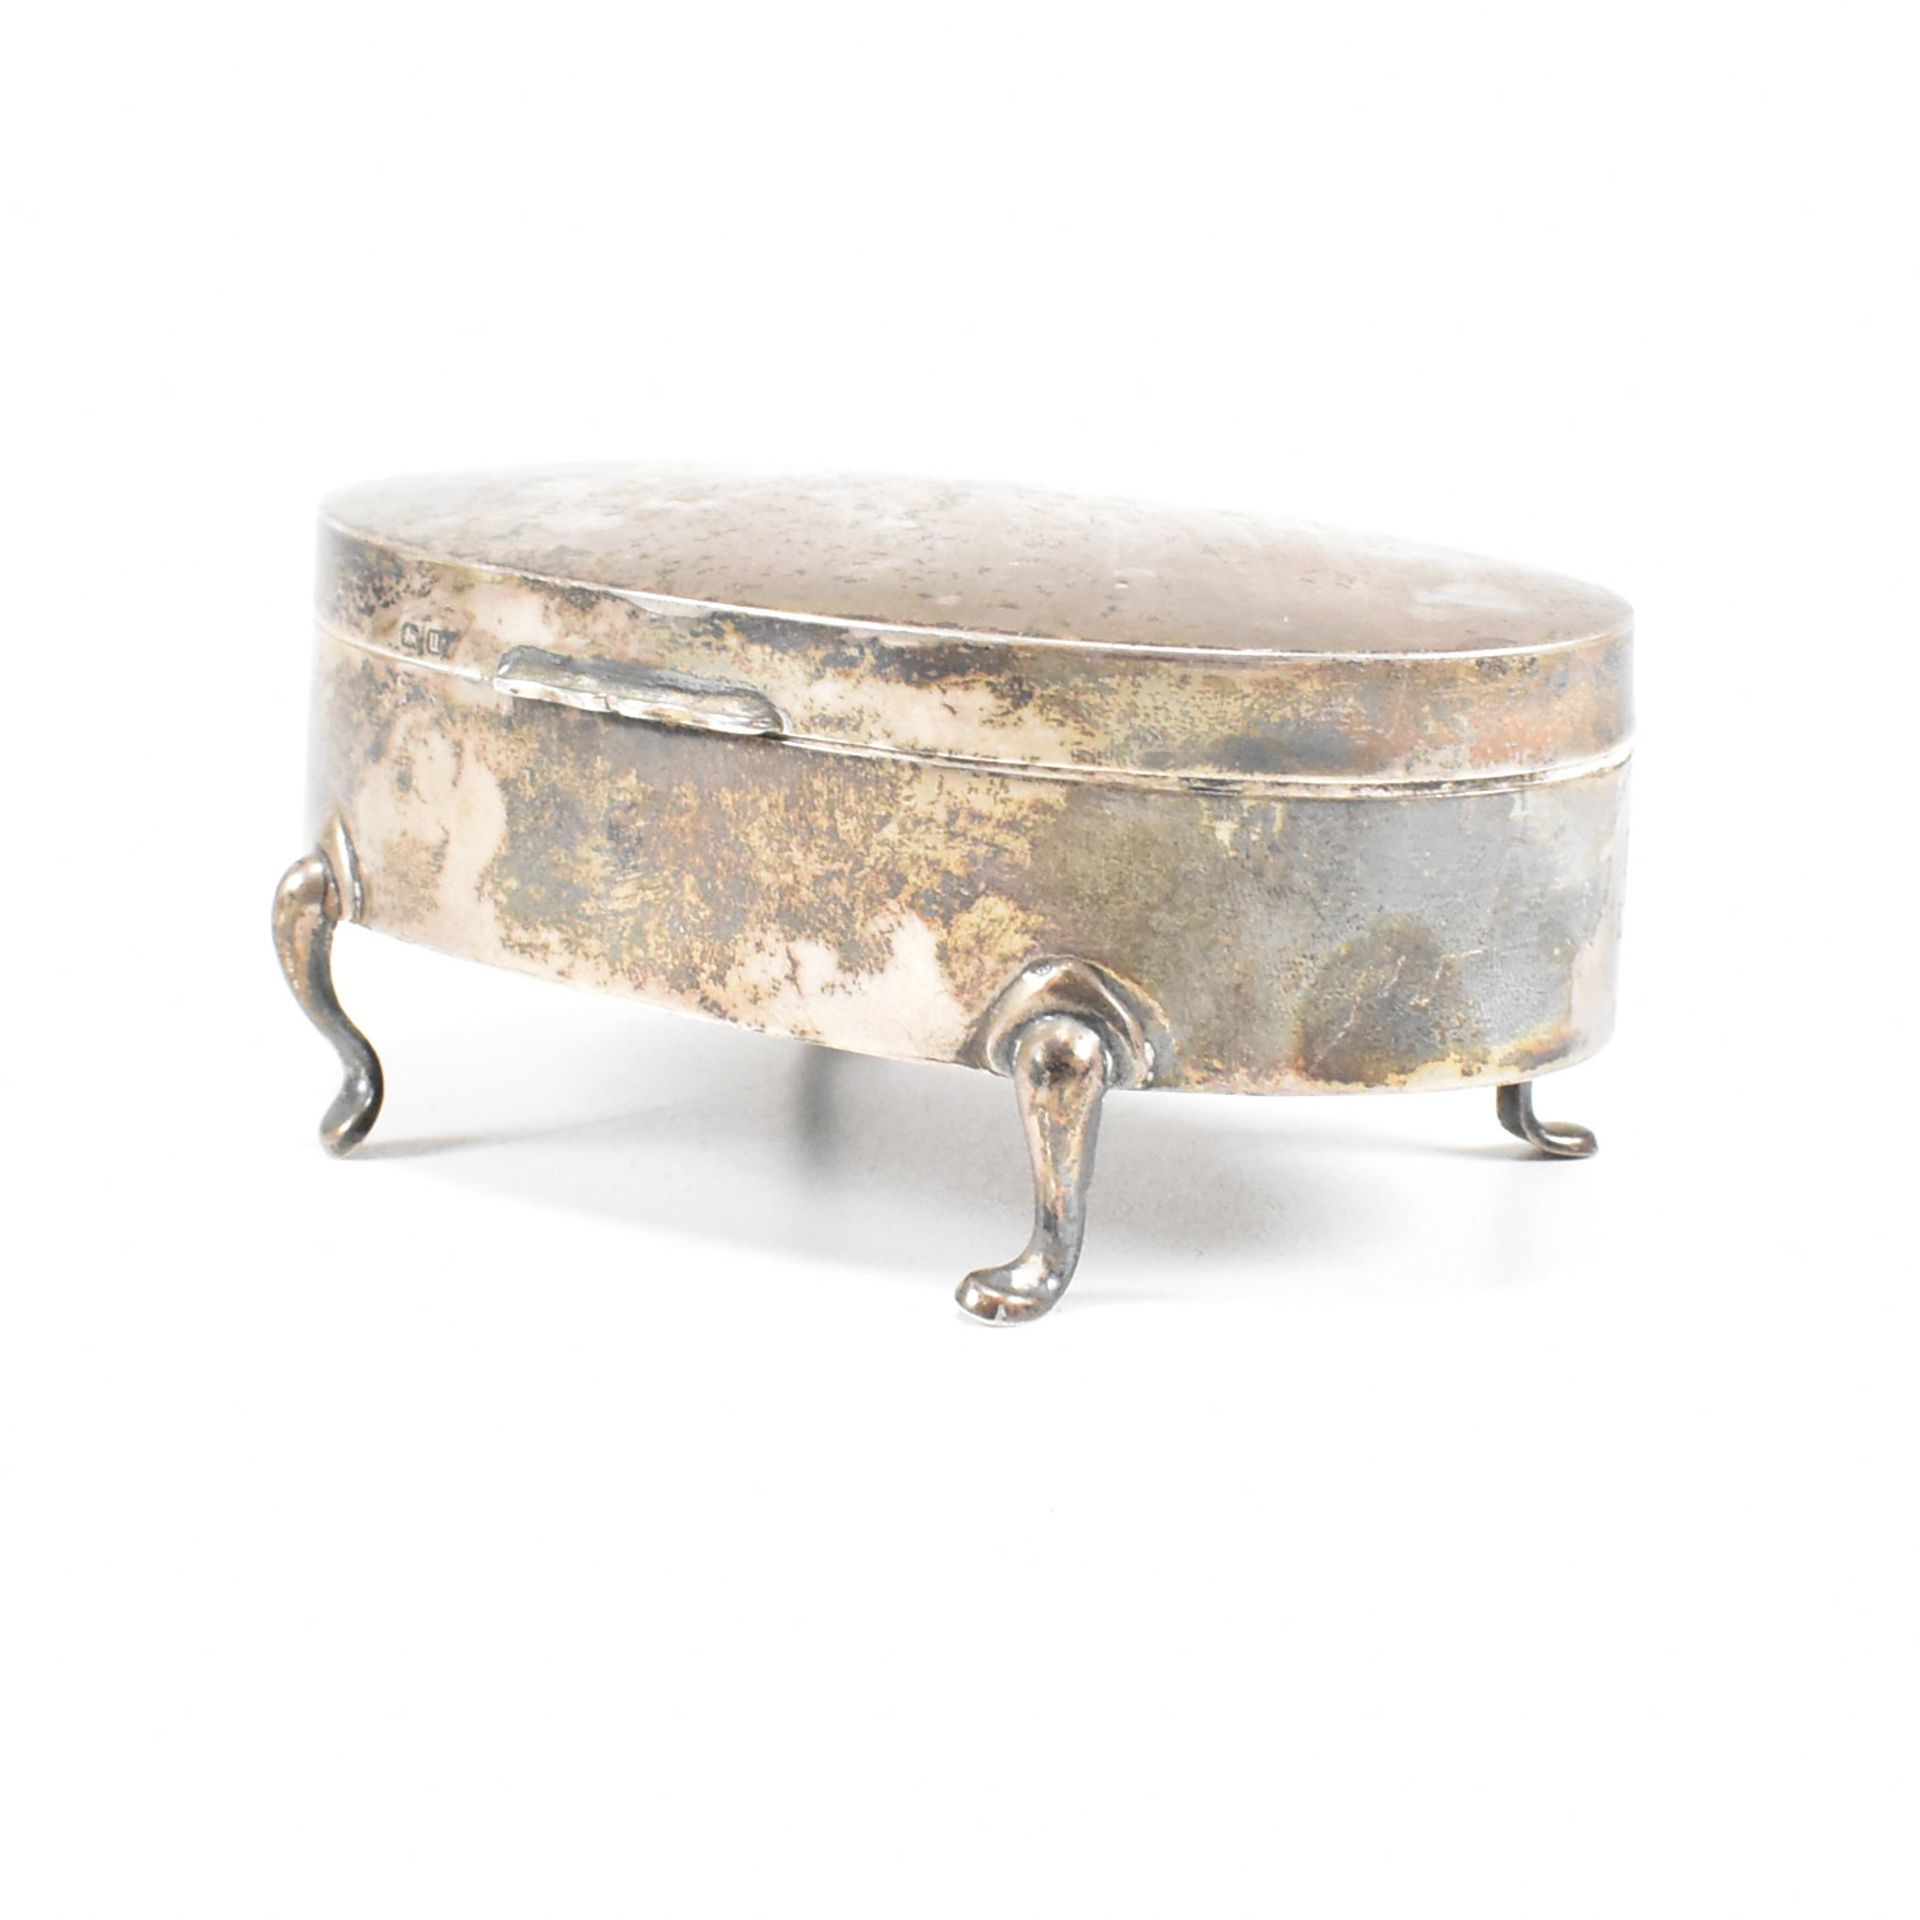 GEORGE V HALLMARKED SILVER MOUNTED JEWELLERY BOX - Image 4 of 11